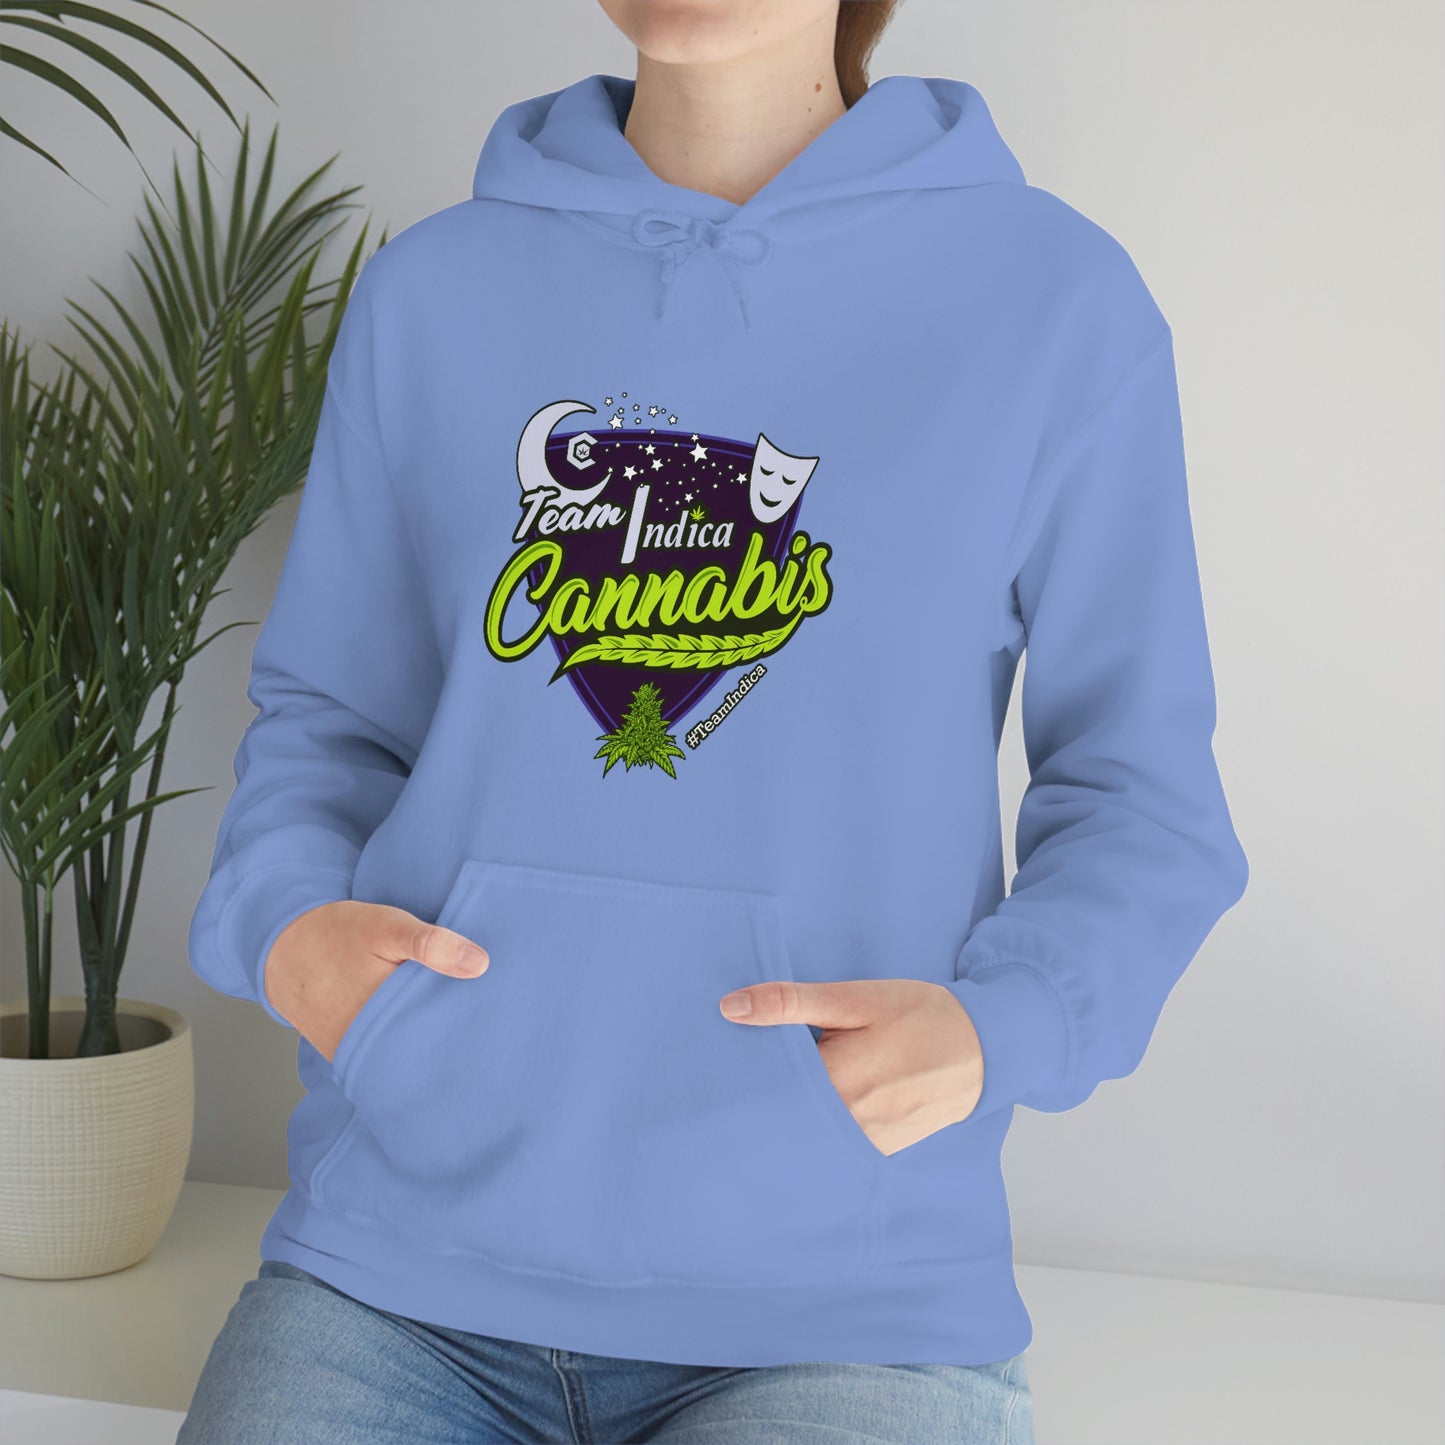 a woman wearing a blue hoodie with the words "Team Indica Cannabis Pullover" on it.